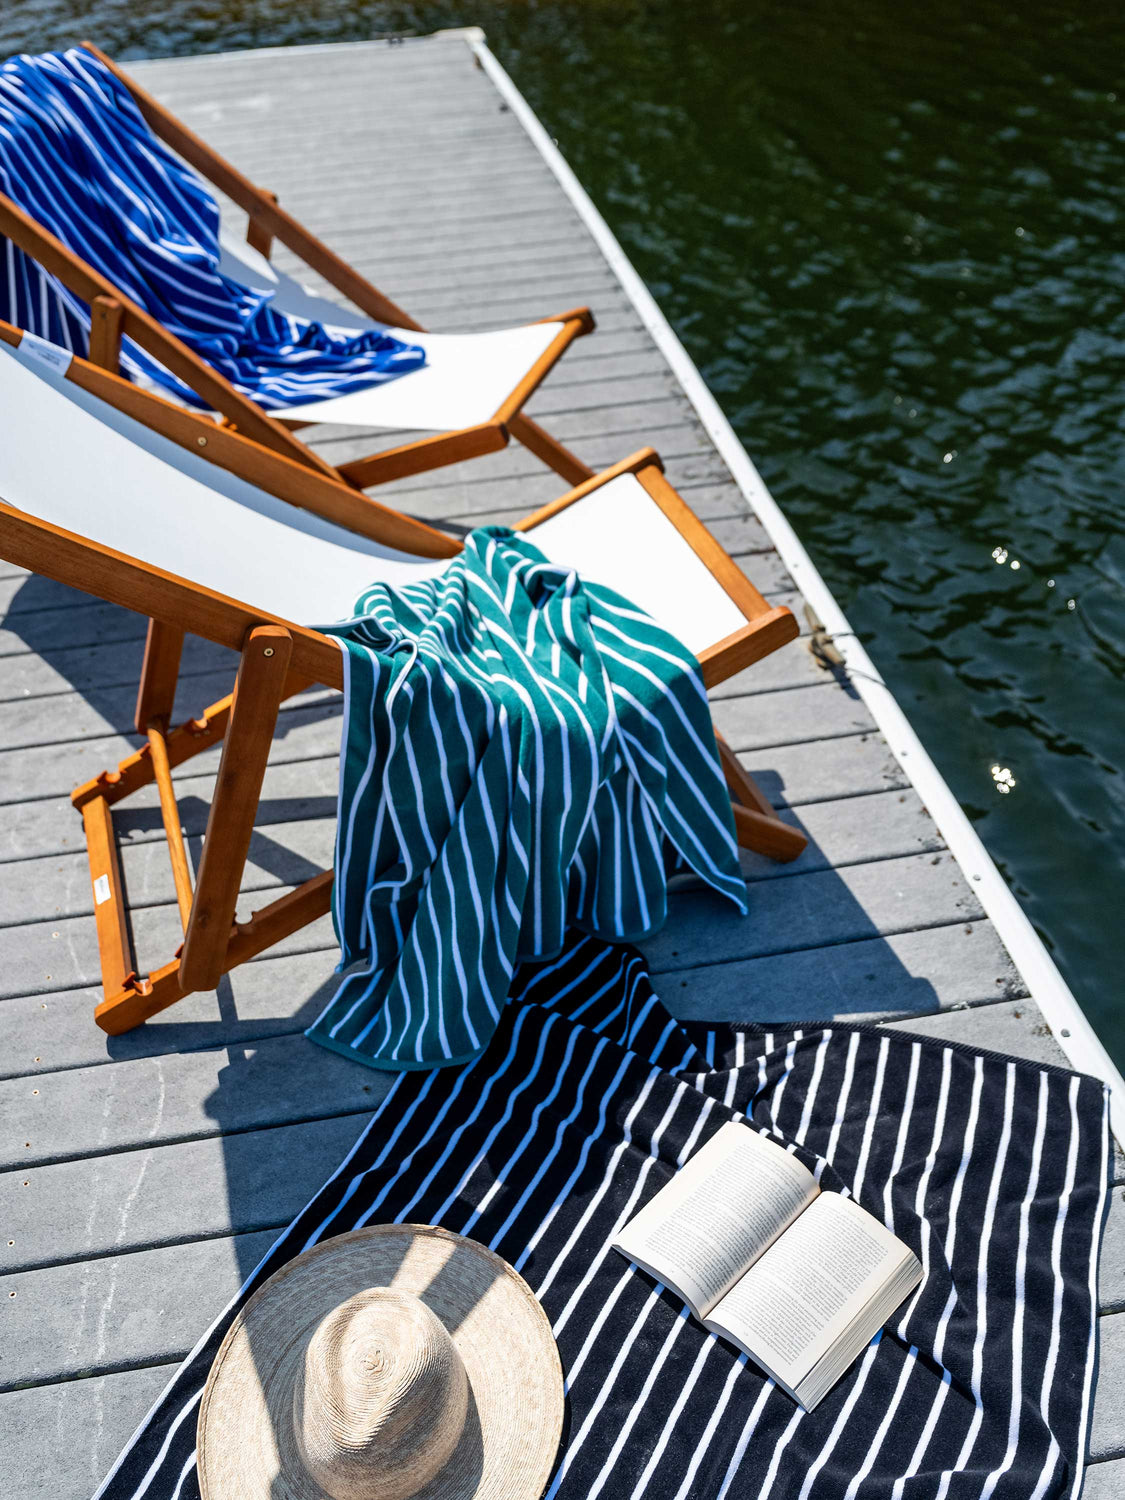 Blue, green, and black striped extra-large cabana towels draped on luxury deck chairs on a lake dock.